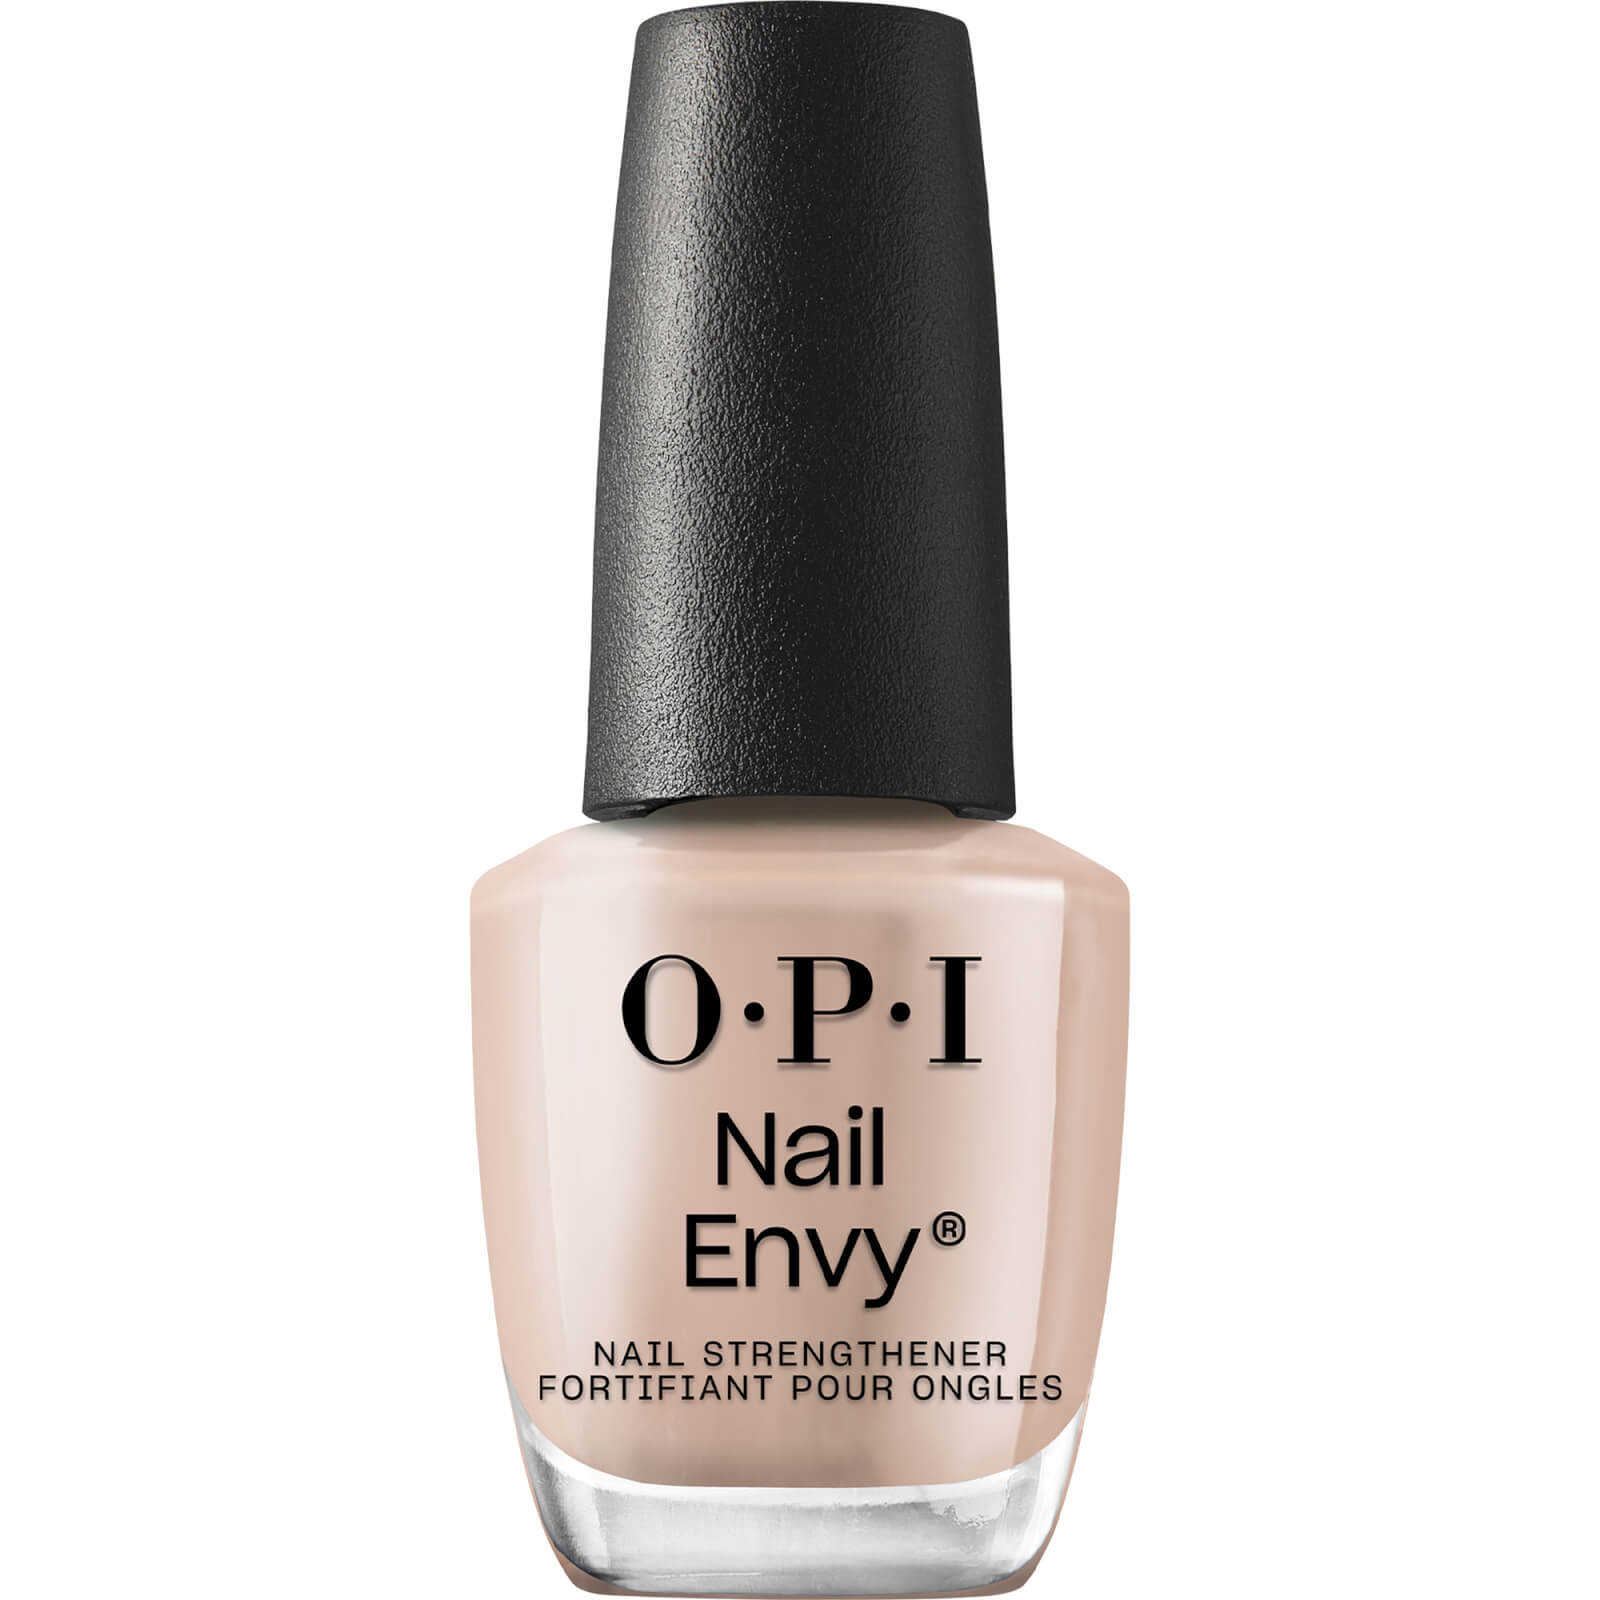 Image of OPI Nail Envy - Nail Strengthener Treatment - Double Nude-y 15ml